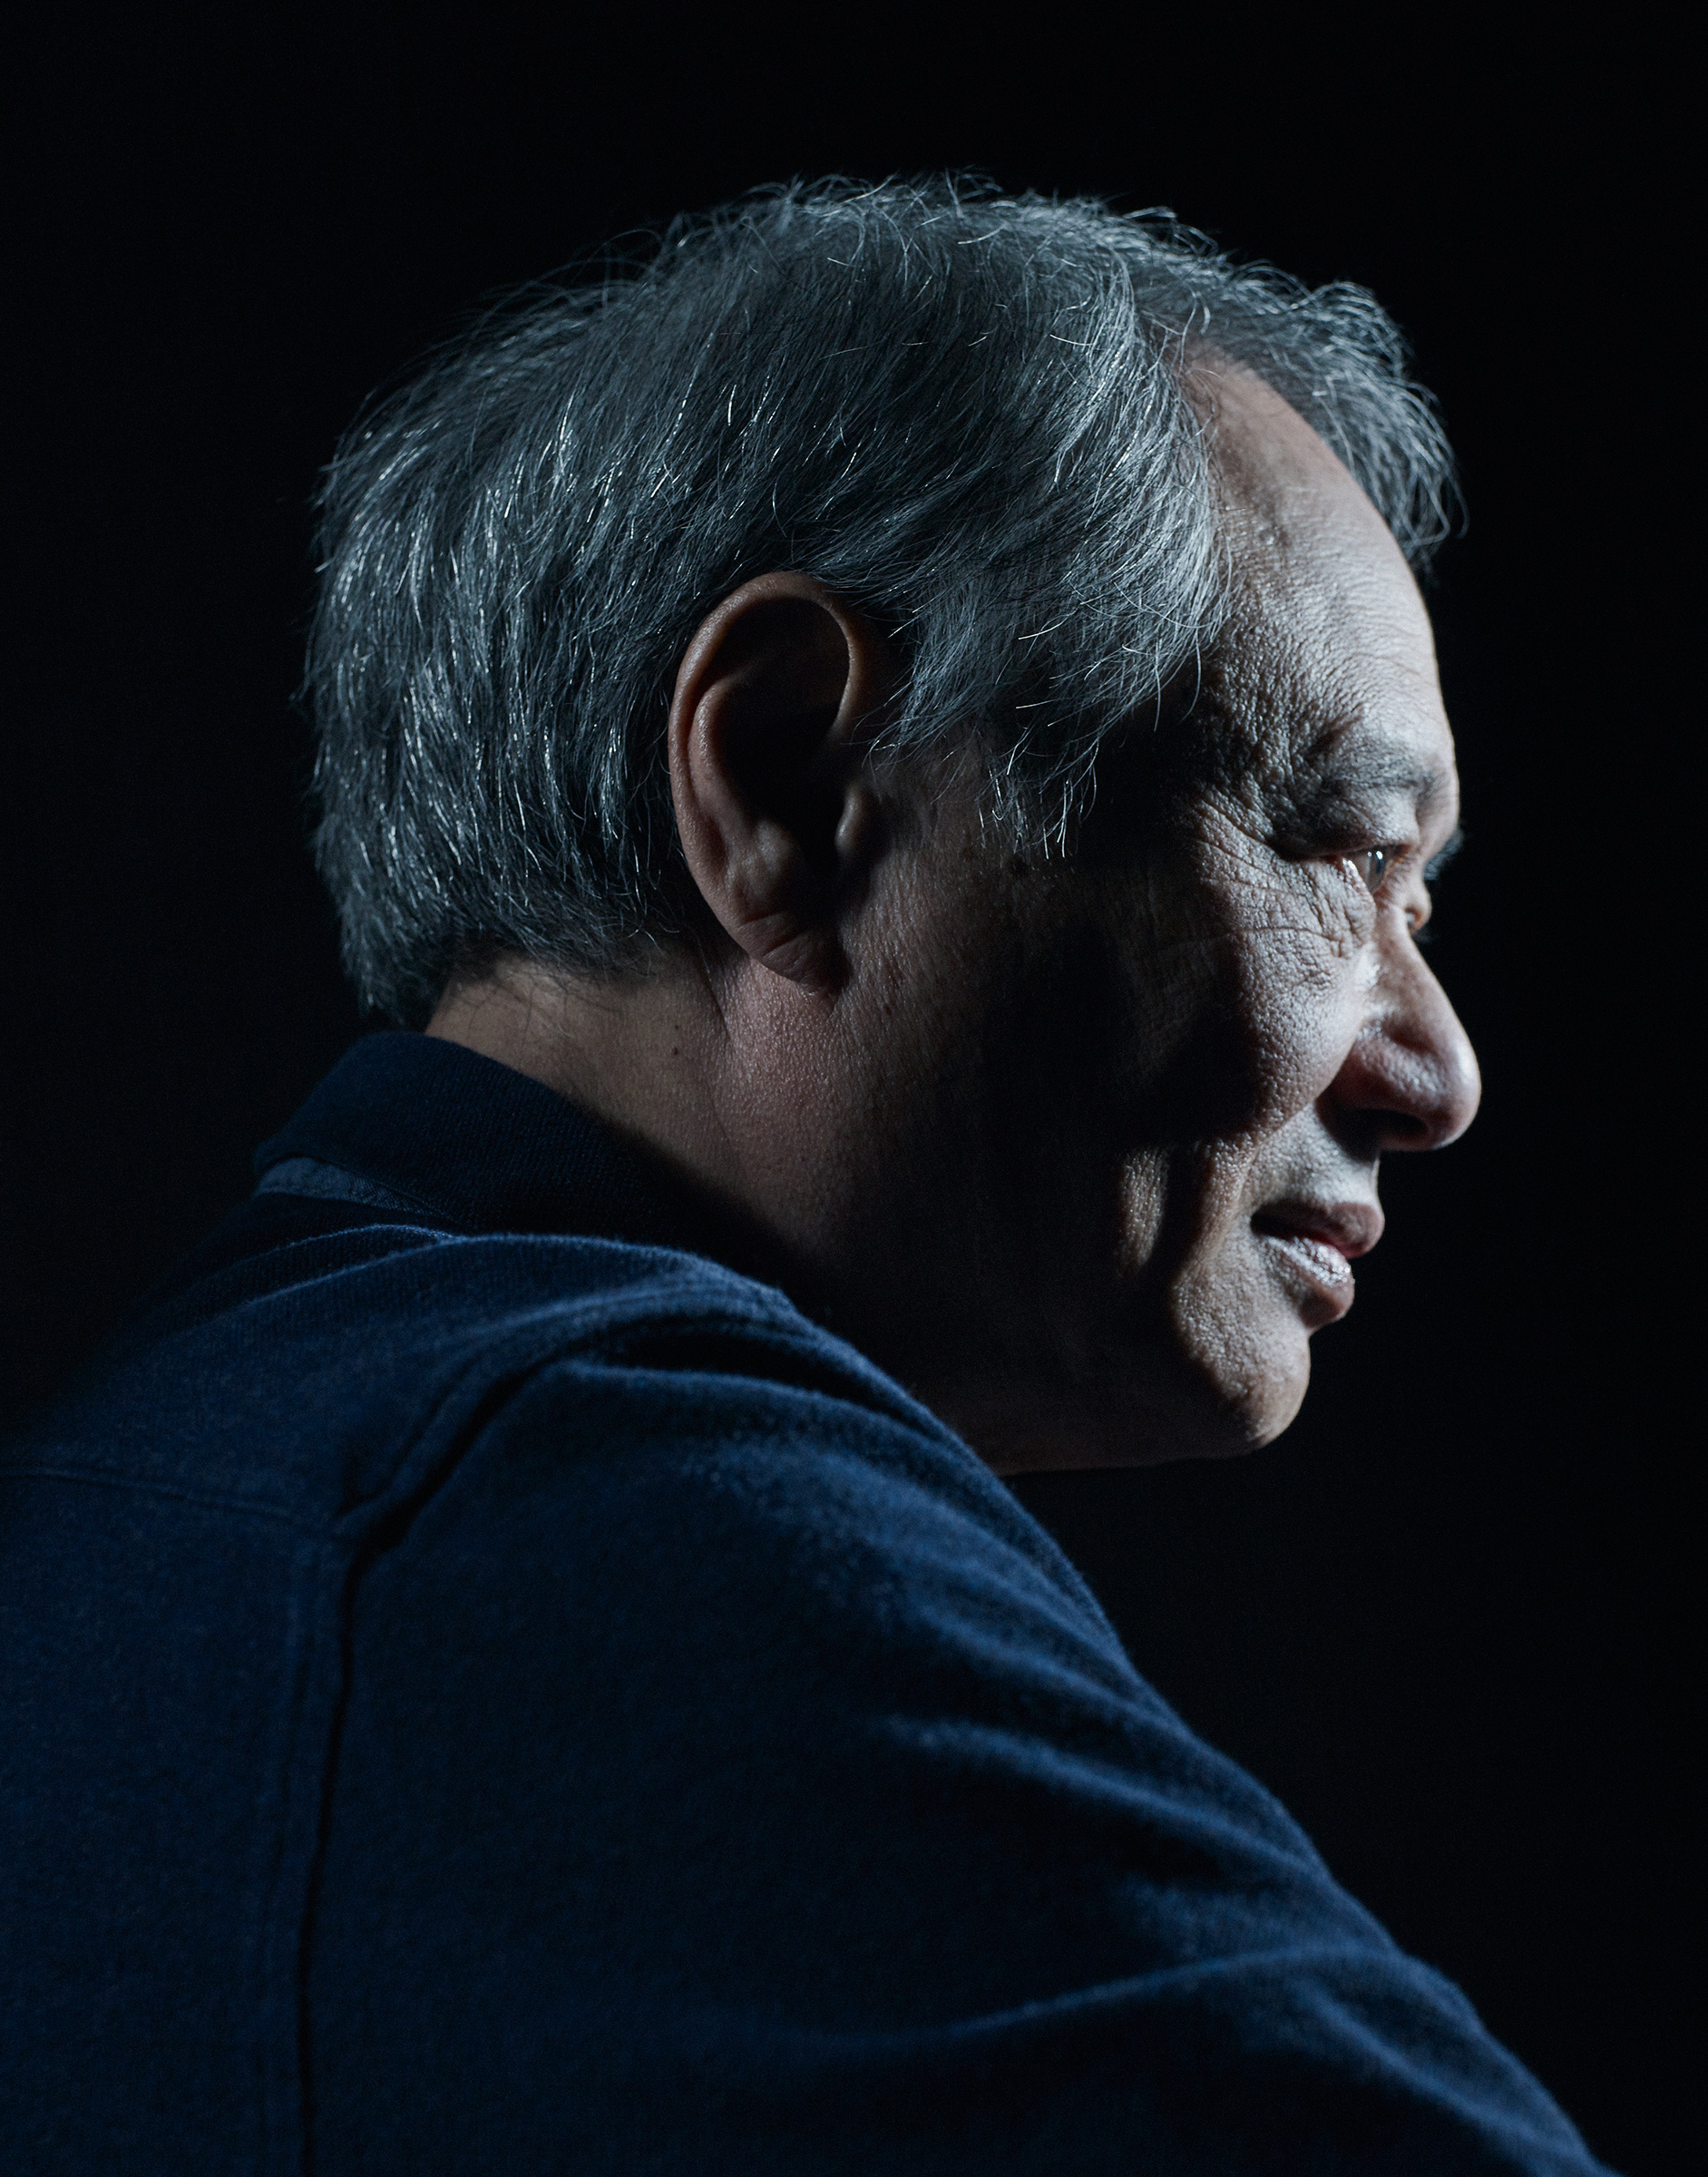 With Gemini Man, director Ang Lee pushes forward into 3-D filmmaking